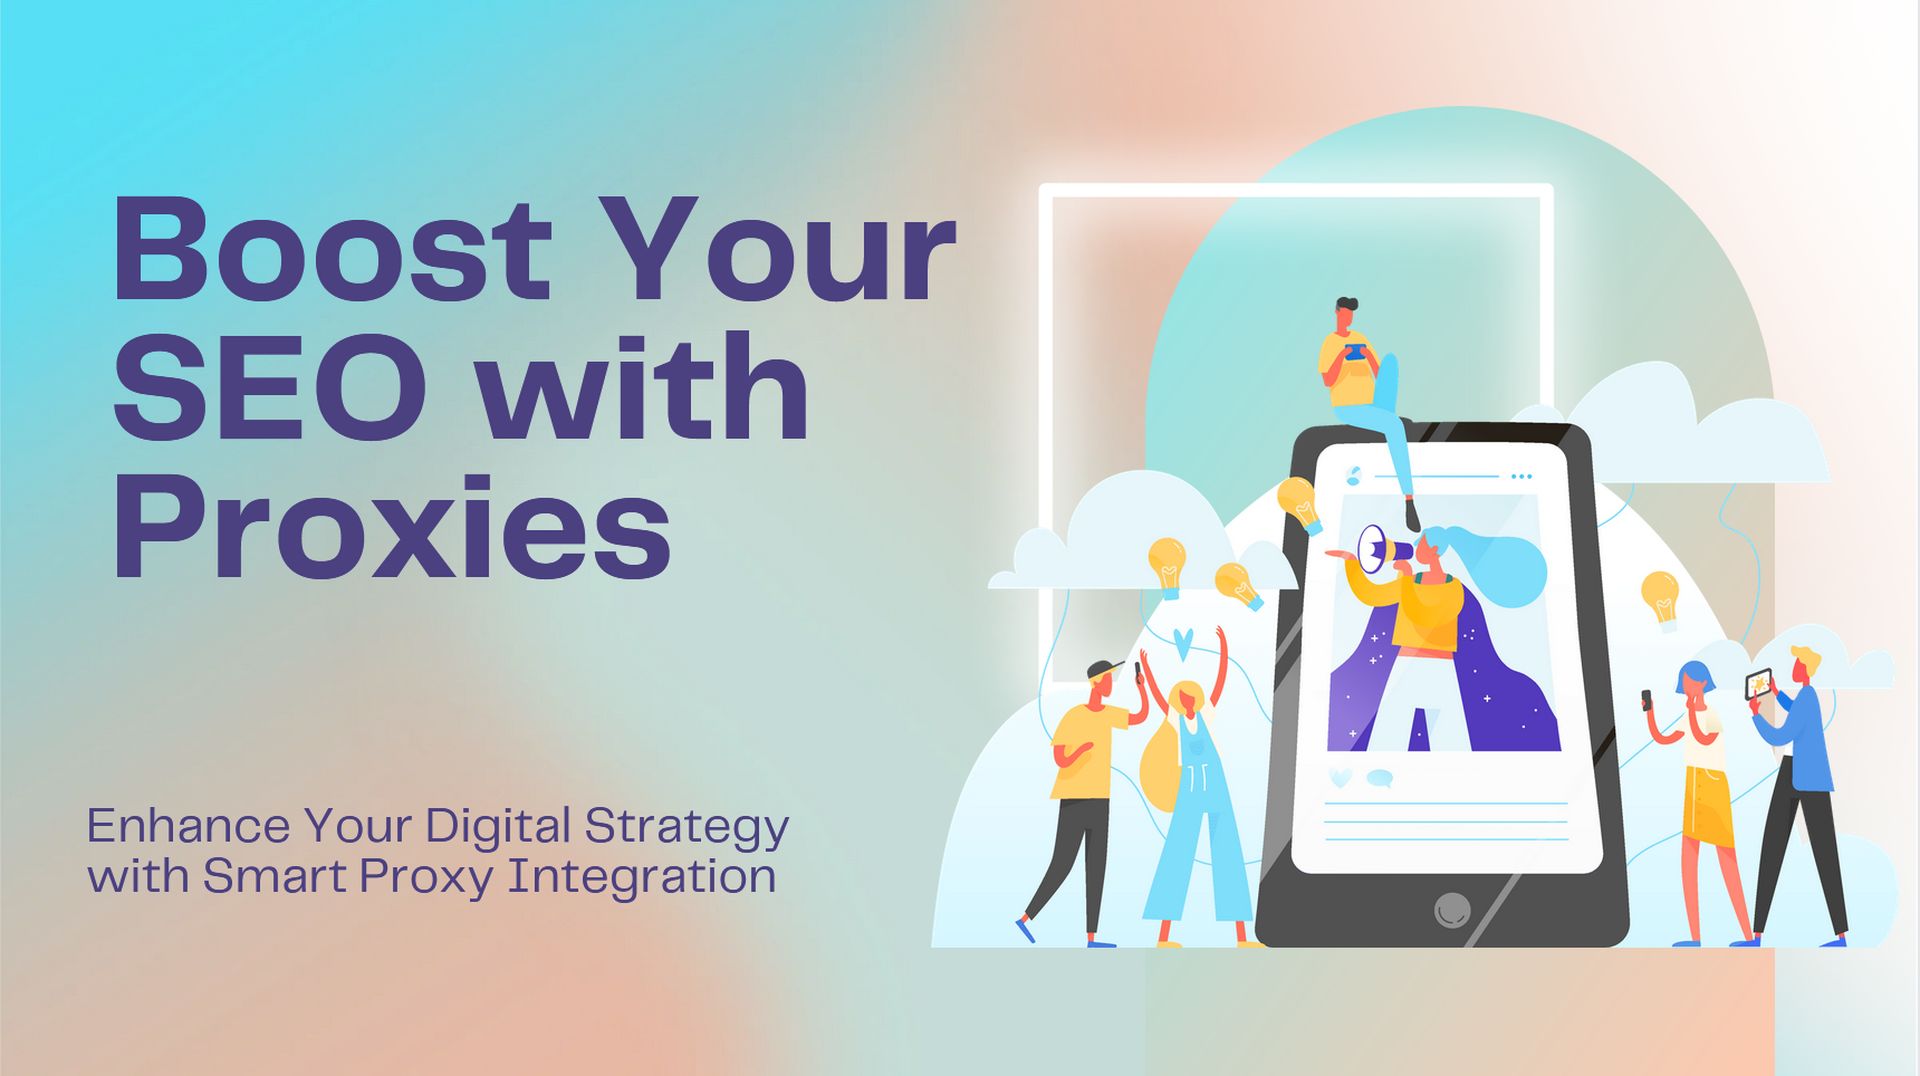  Enhancing your digital strategy